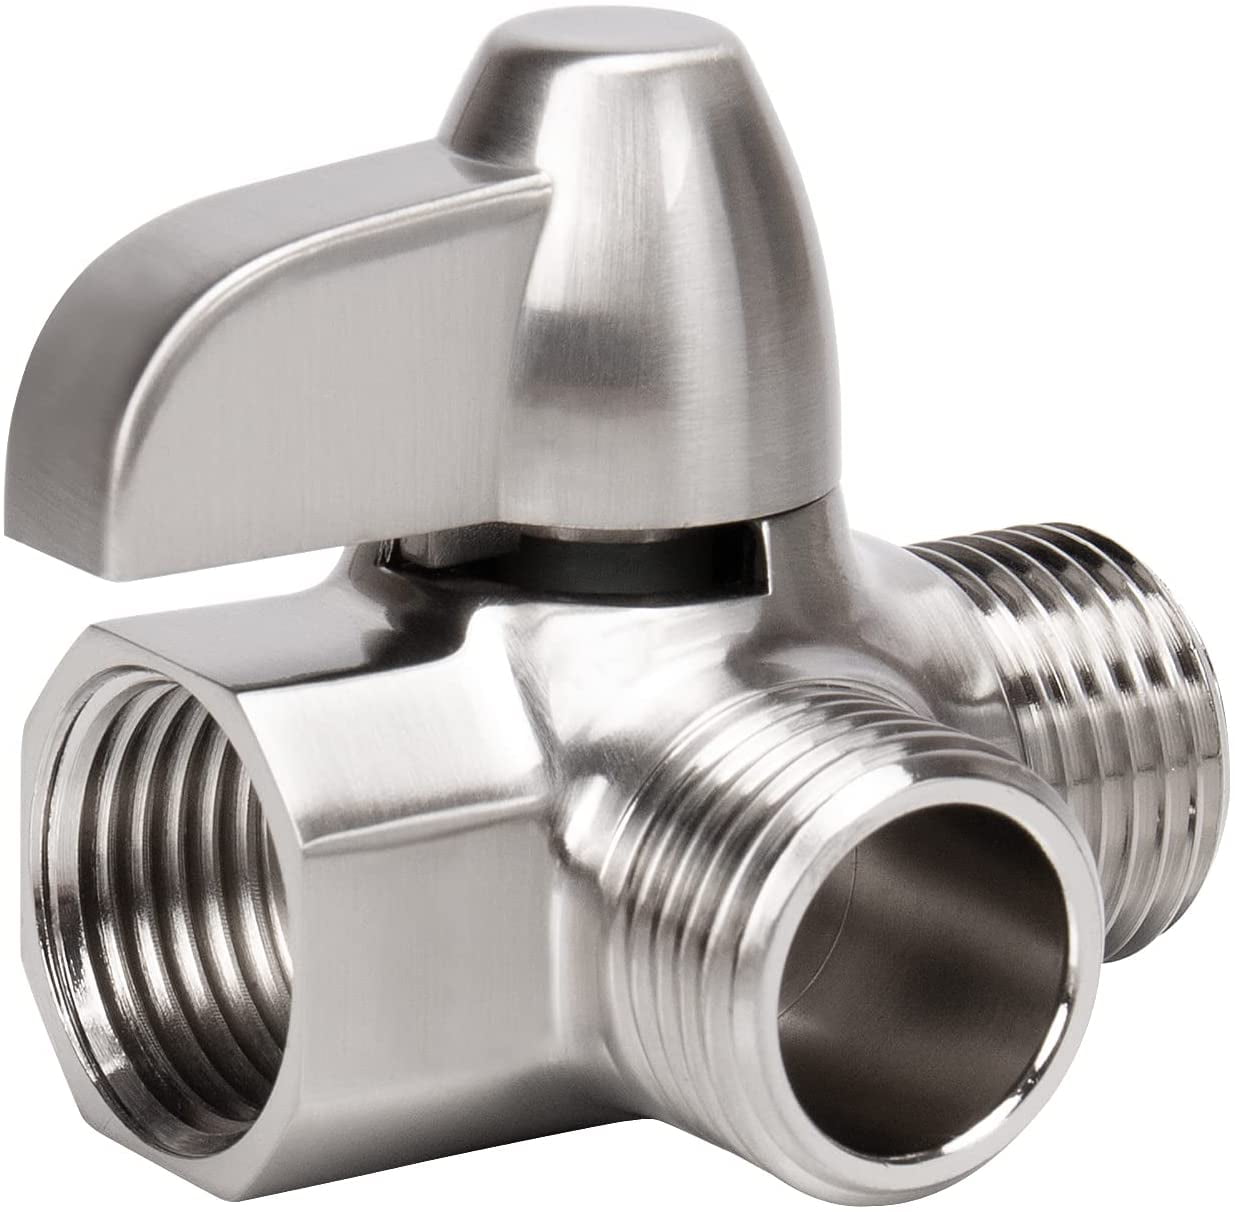 Solid Brass 3-Way Shower Arm Diverter Valve T Adapter Replacement Brushed Nickel 